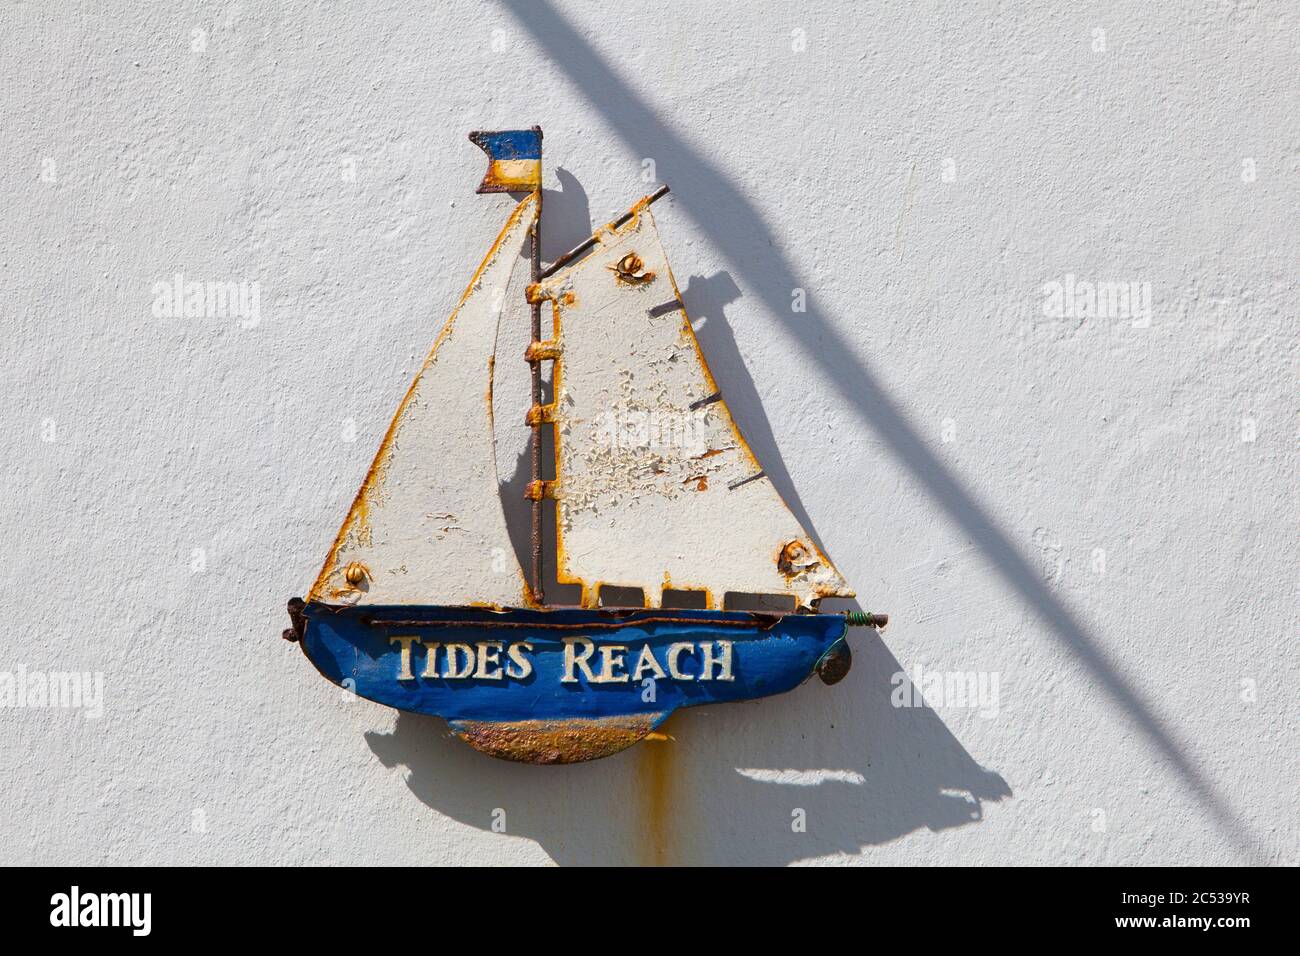 Sailing boat name decoration on the wall of a house in Appledore, North Devon Stock Photo